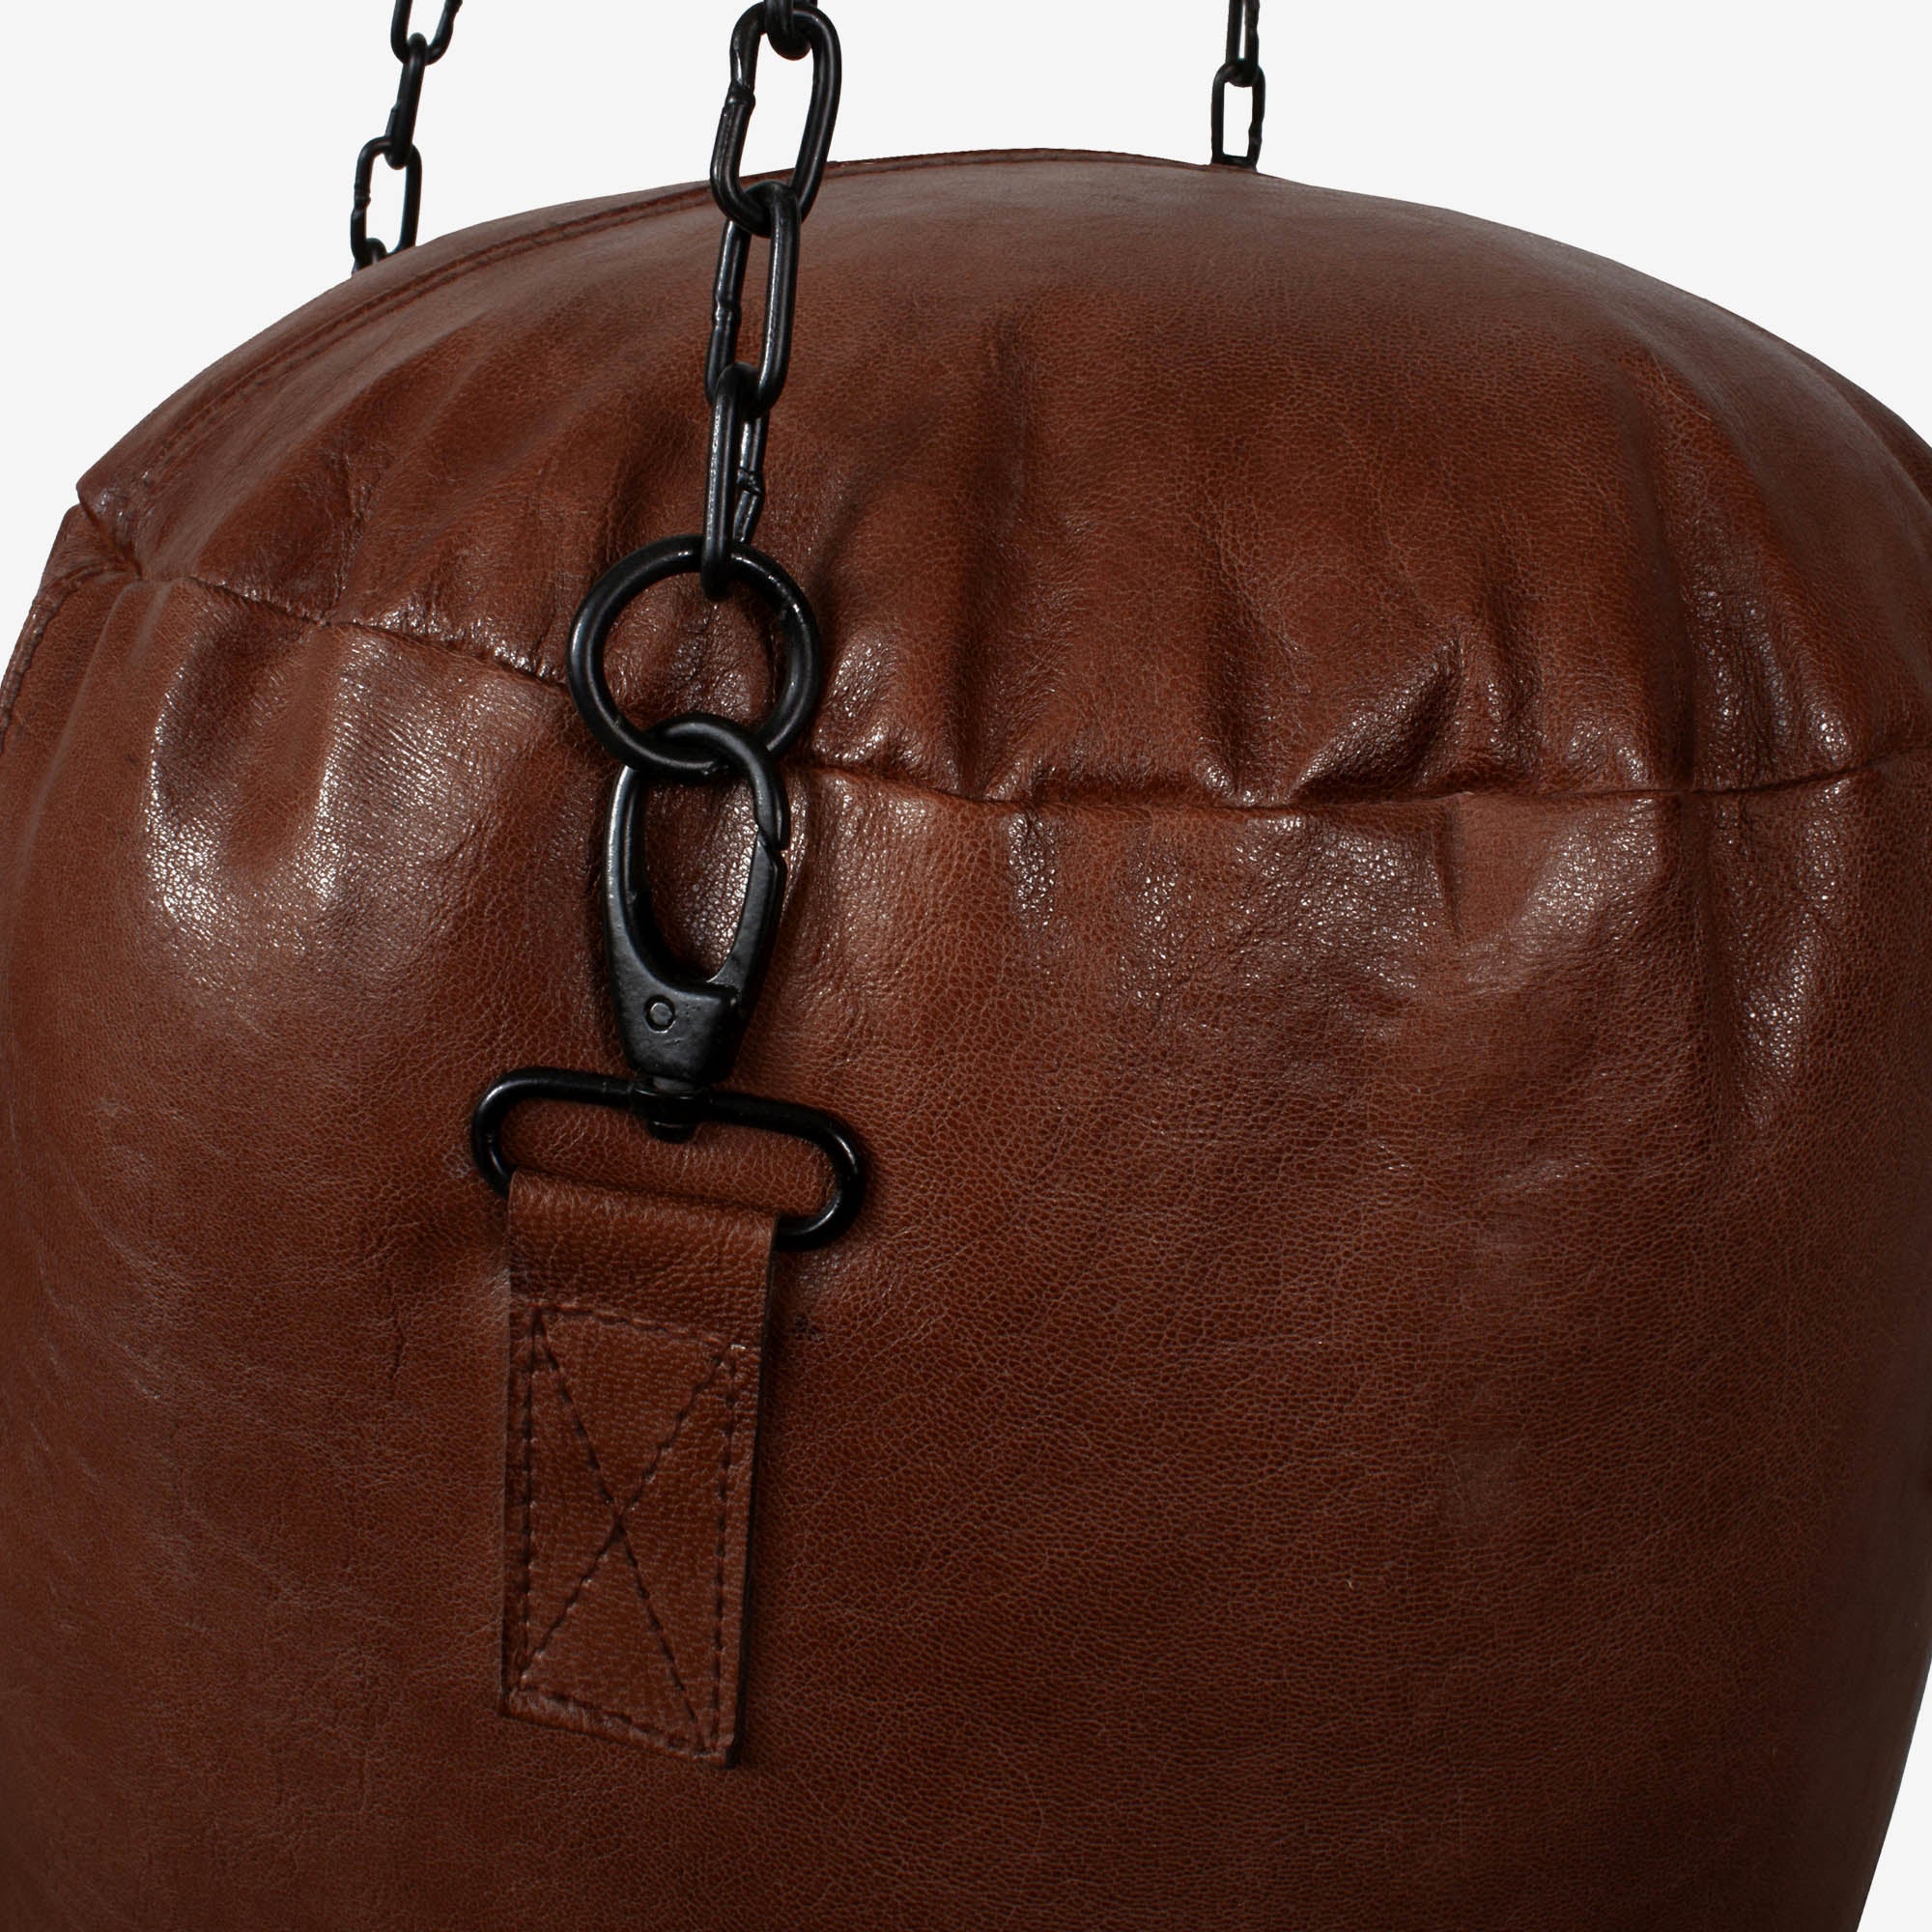 Leather punching bag small – large h68xdsn.32cm